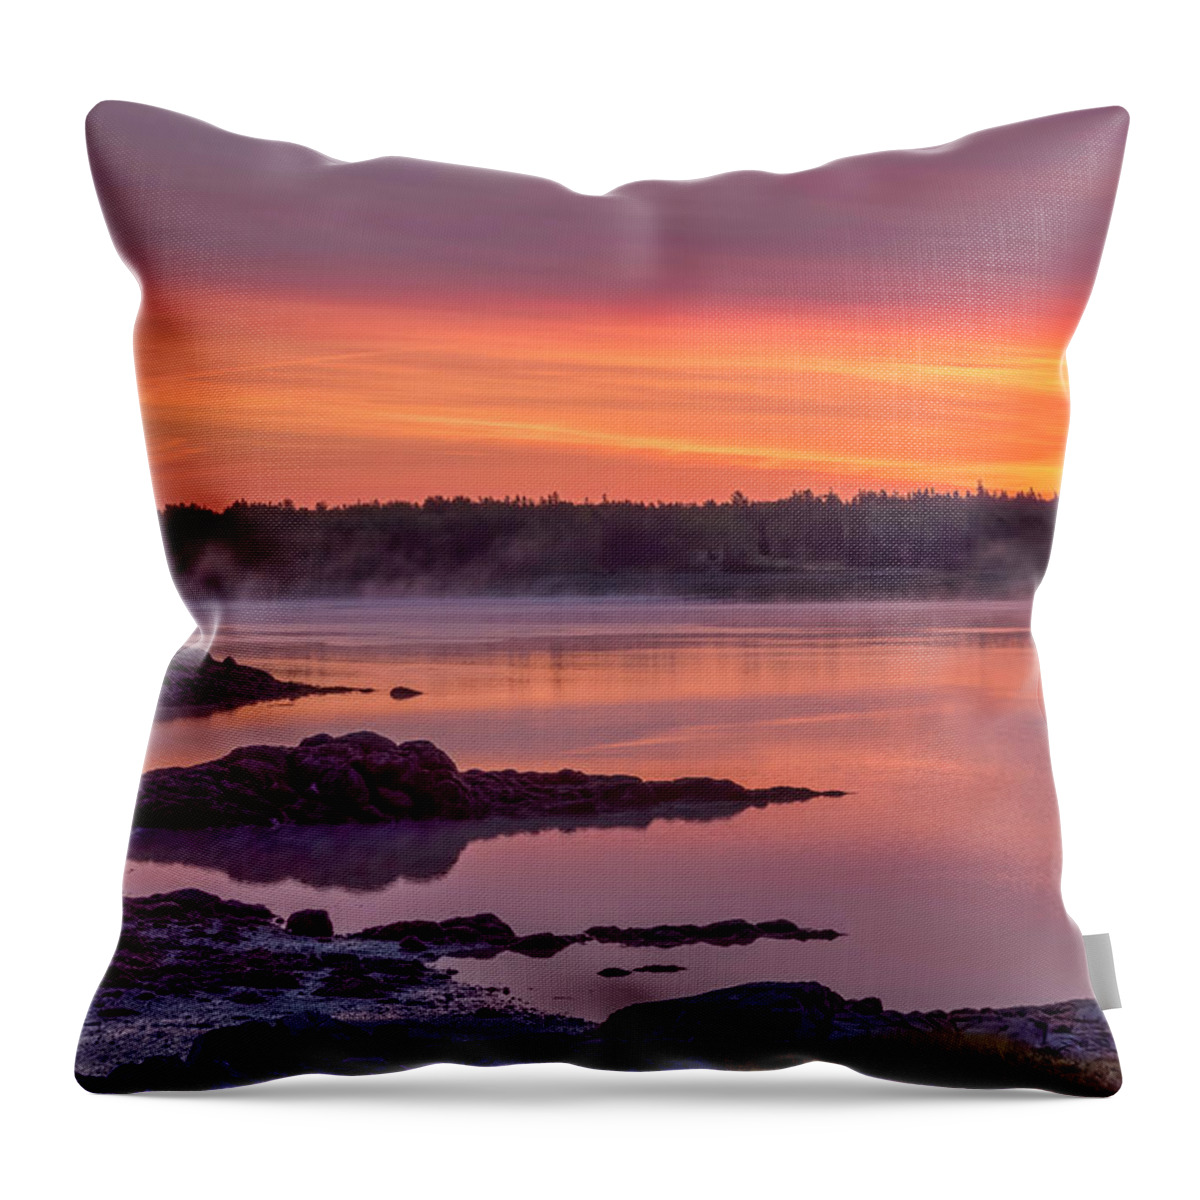 Cobscook Bay State Park Throw Pillow featuring the photograph Gorgeous Cobscook Sunrise by Jurgen Lorenzen